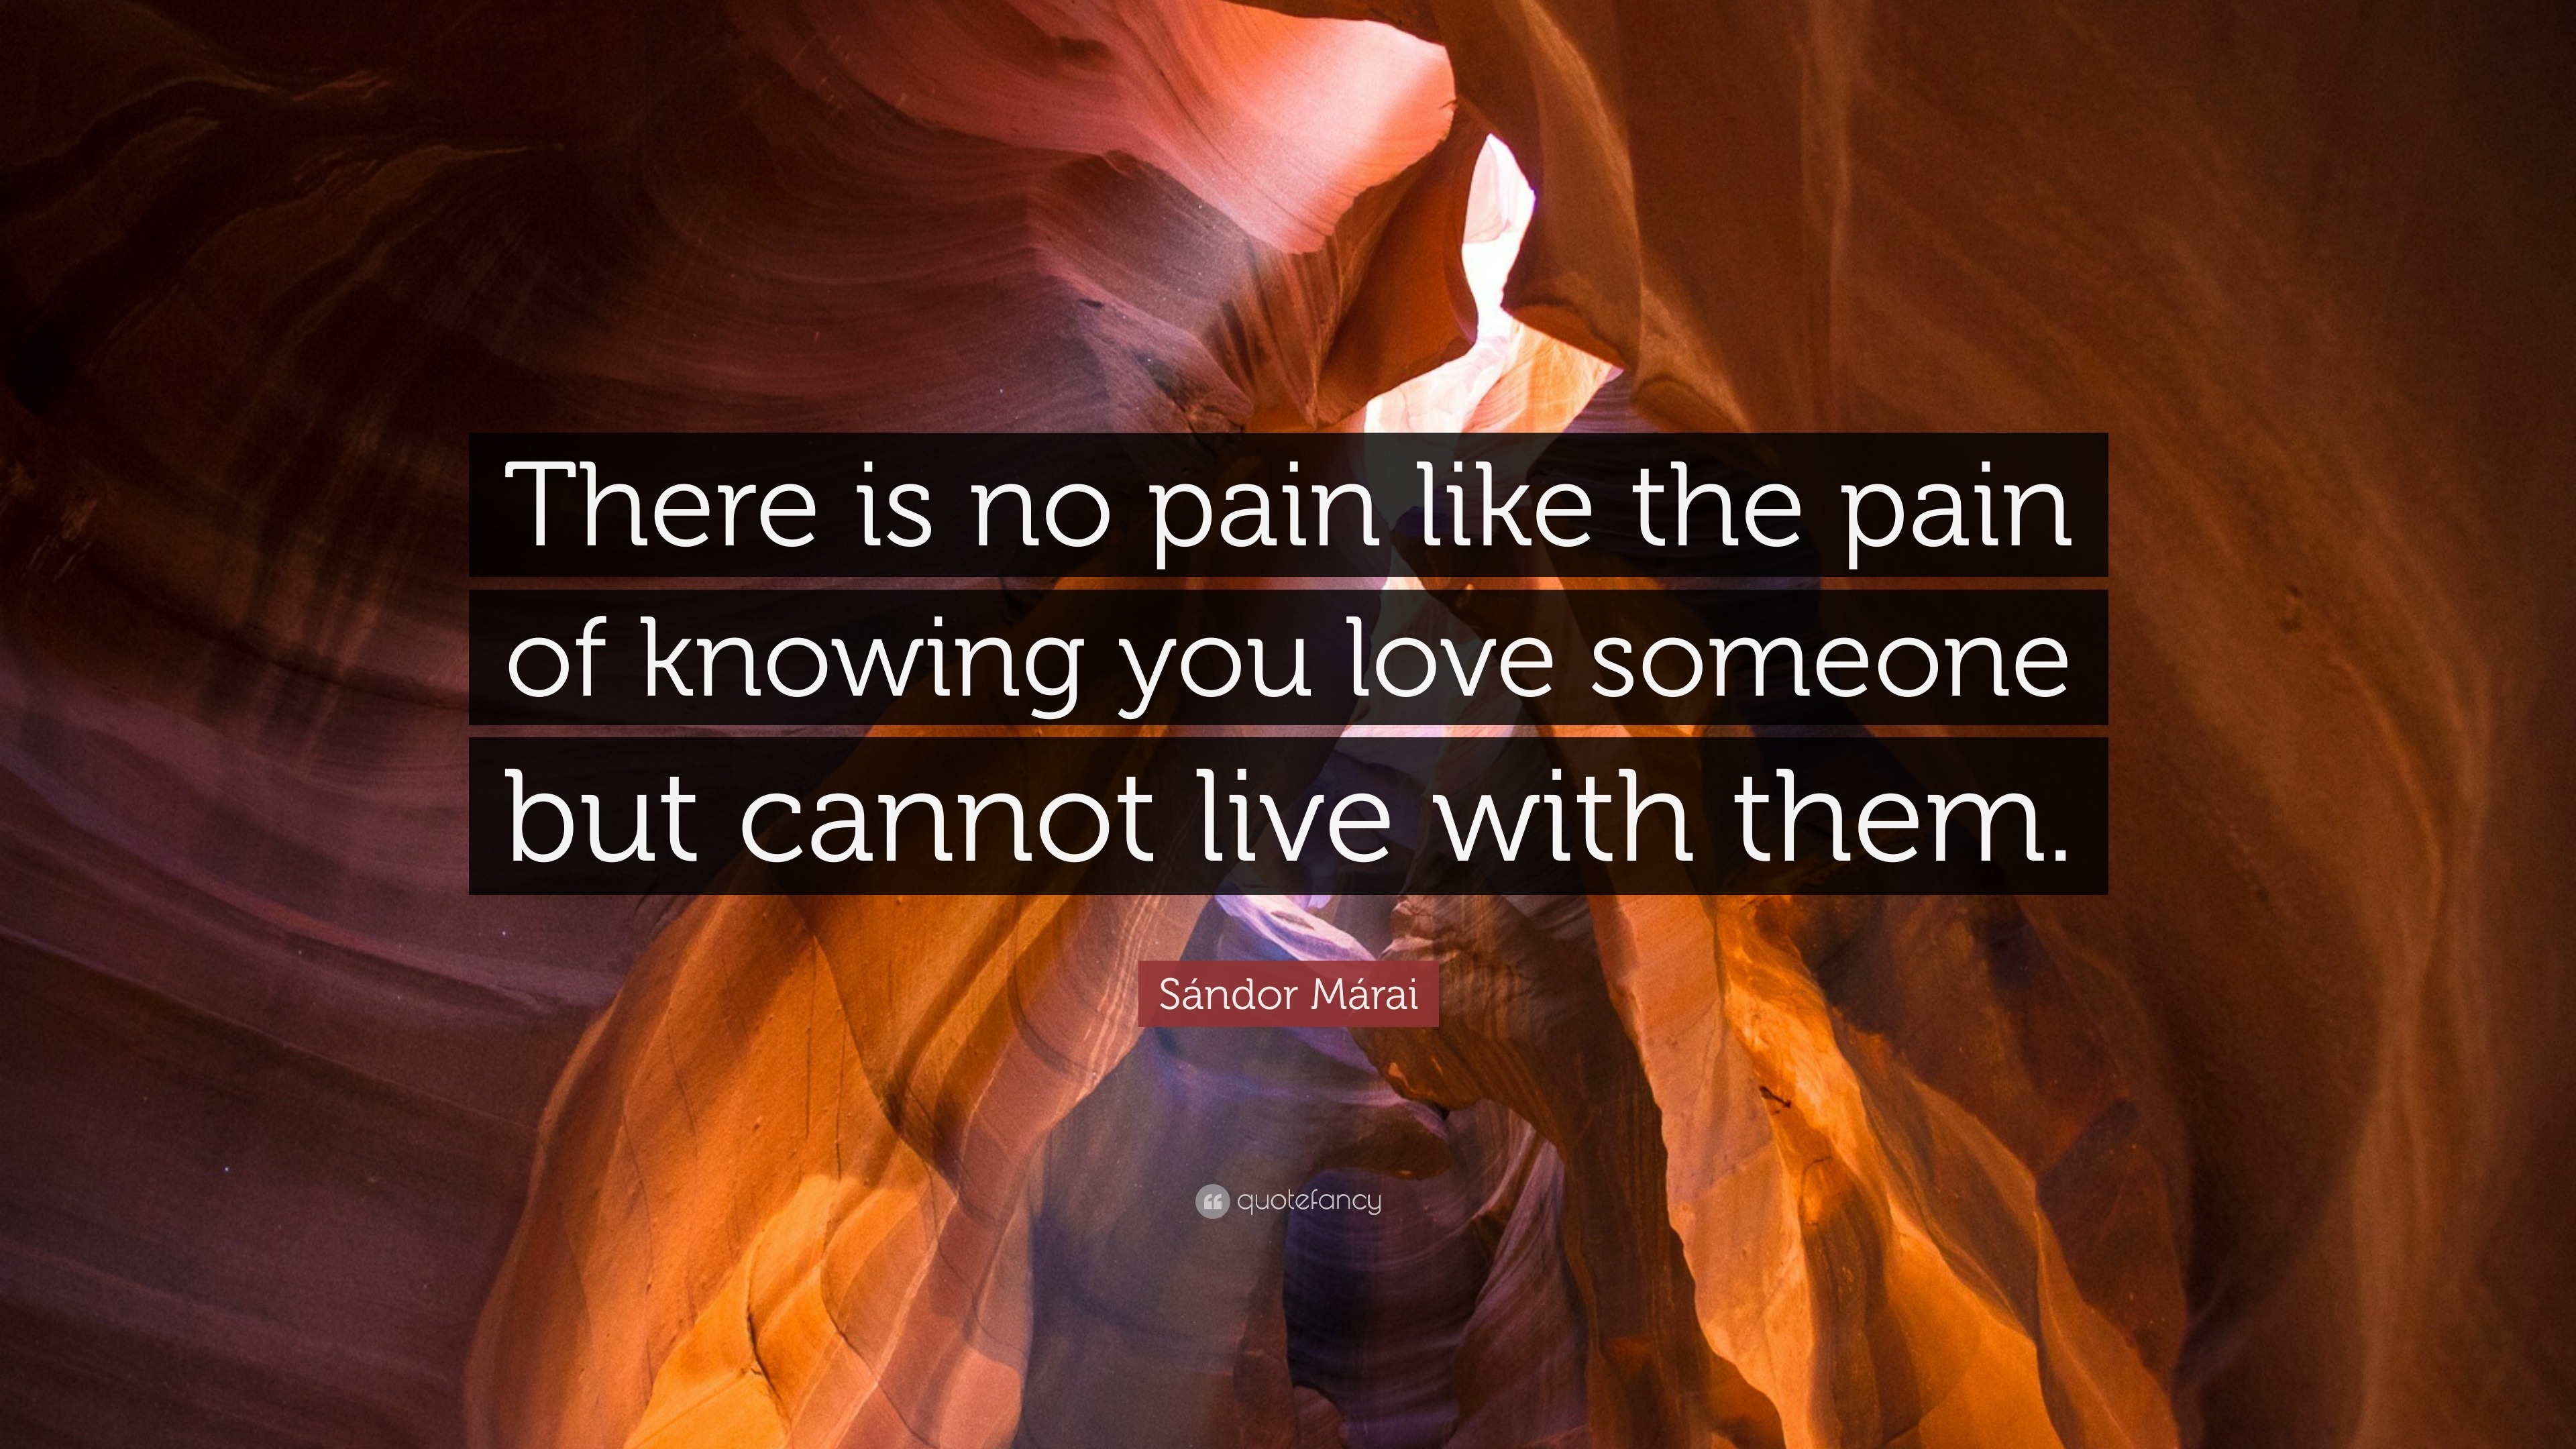 Sándor Márai Quote “There is no pain like the pain of knowing you love